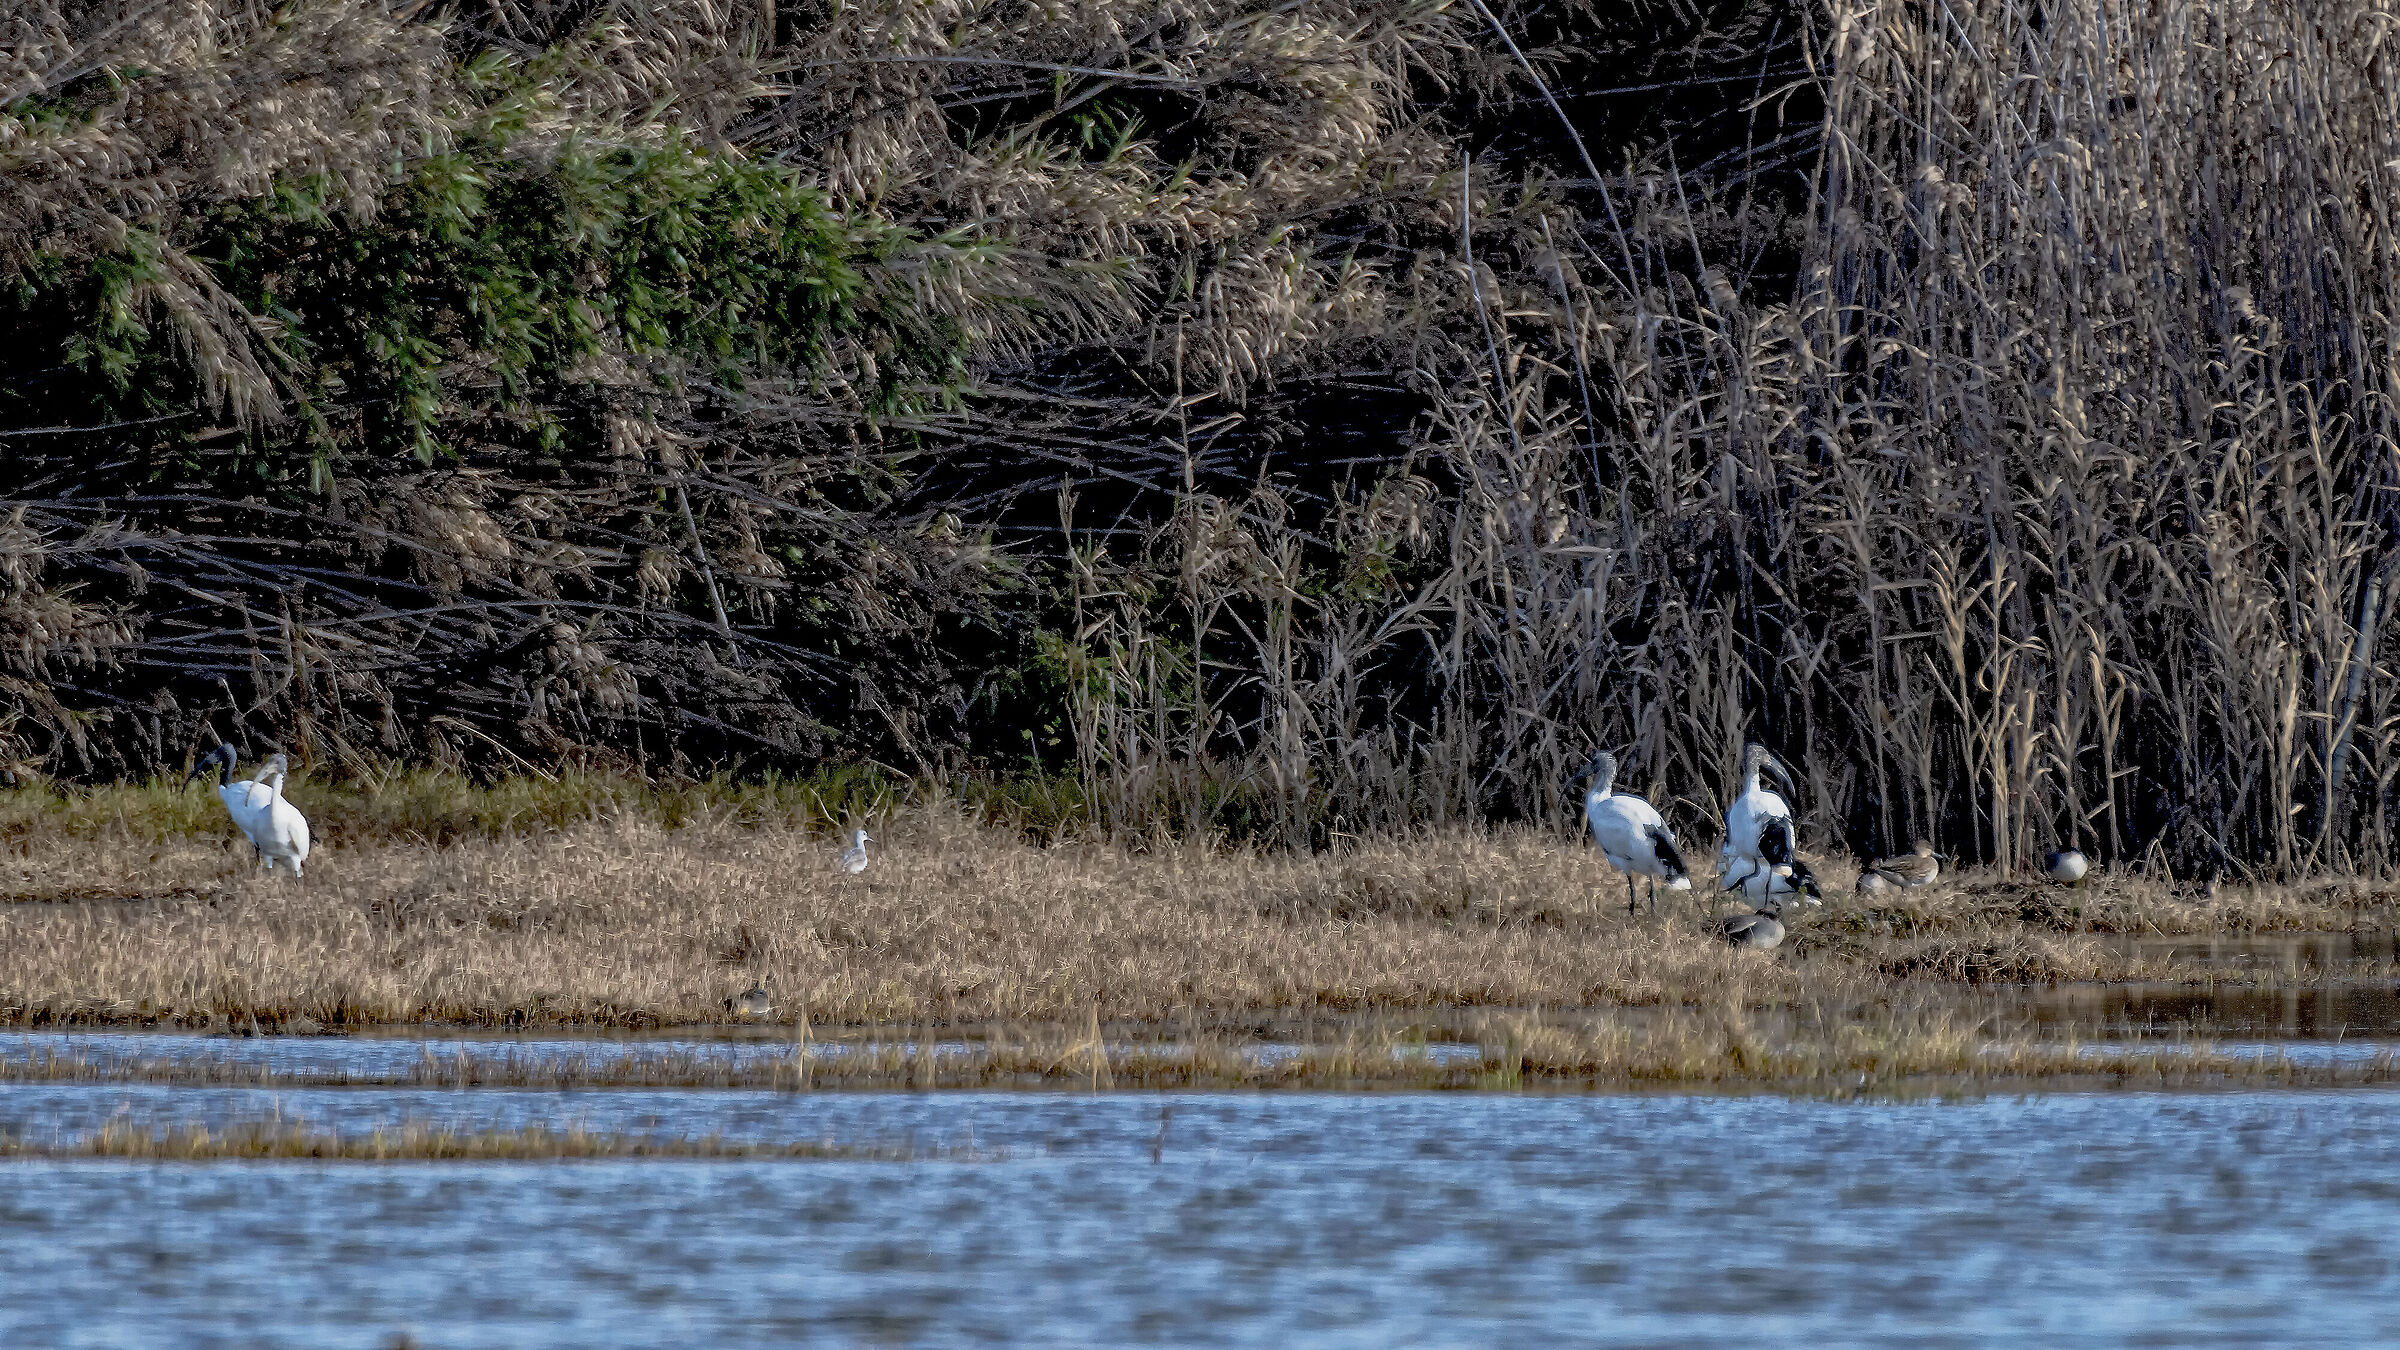 Sacred Ibis on the other side...